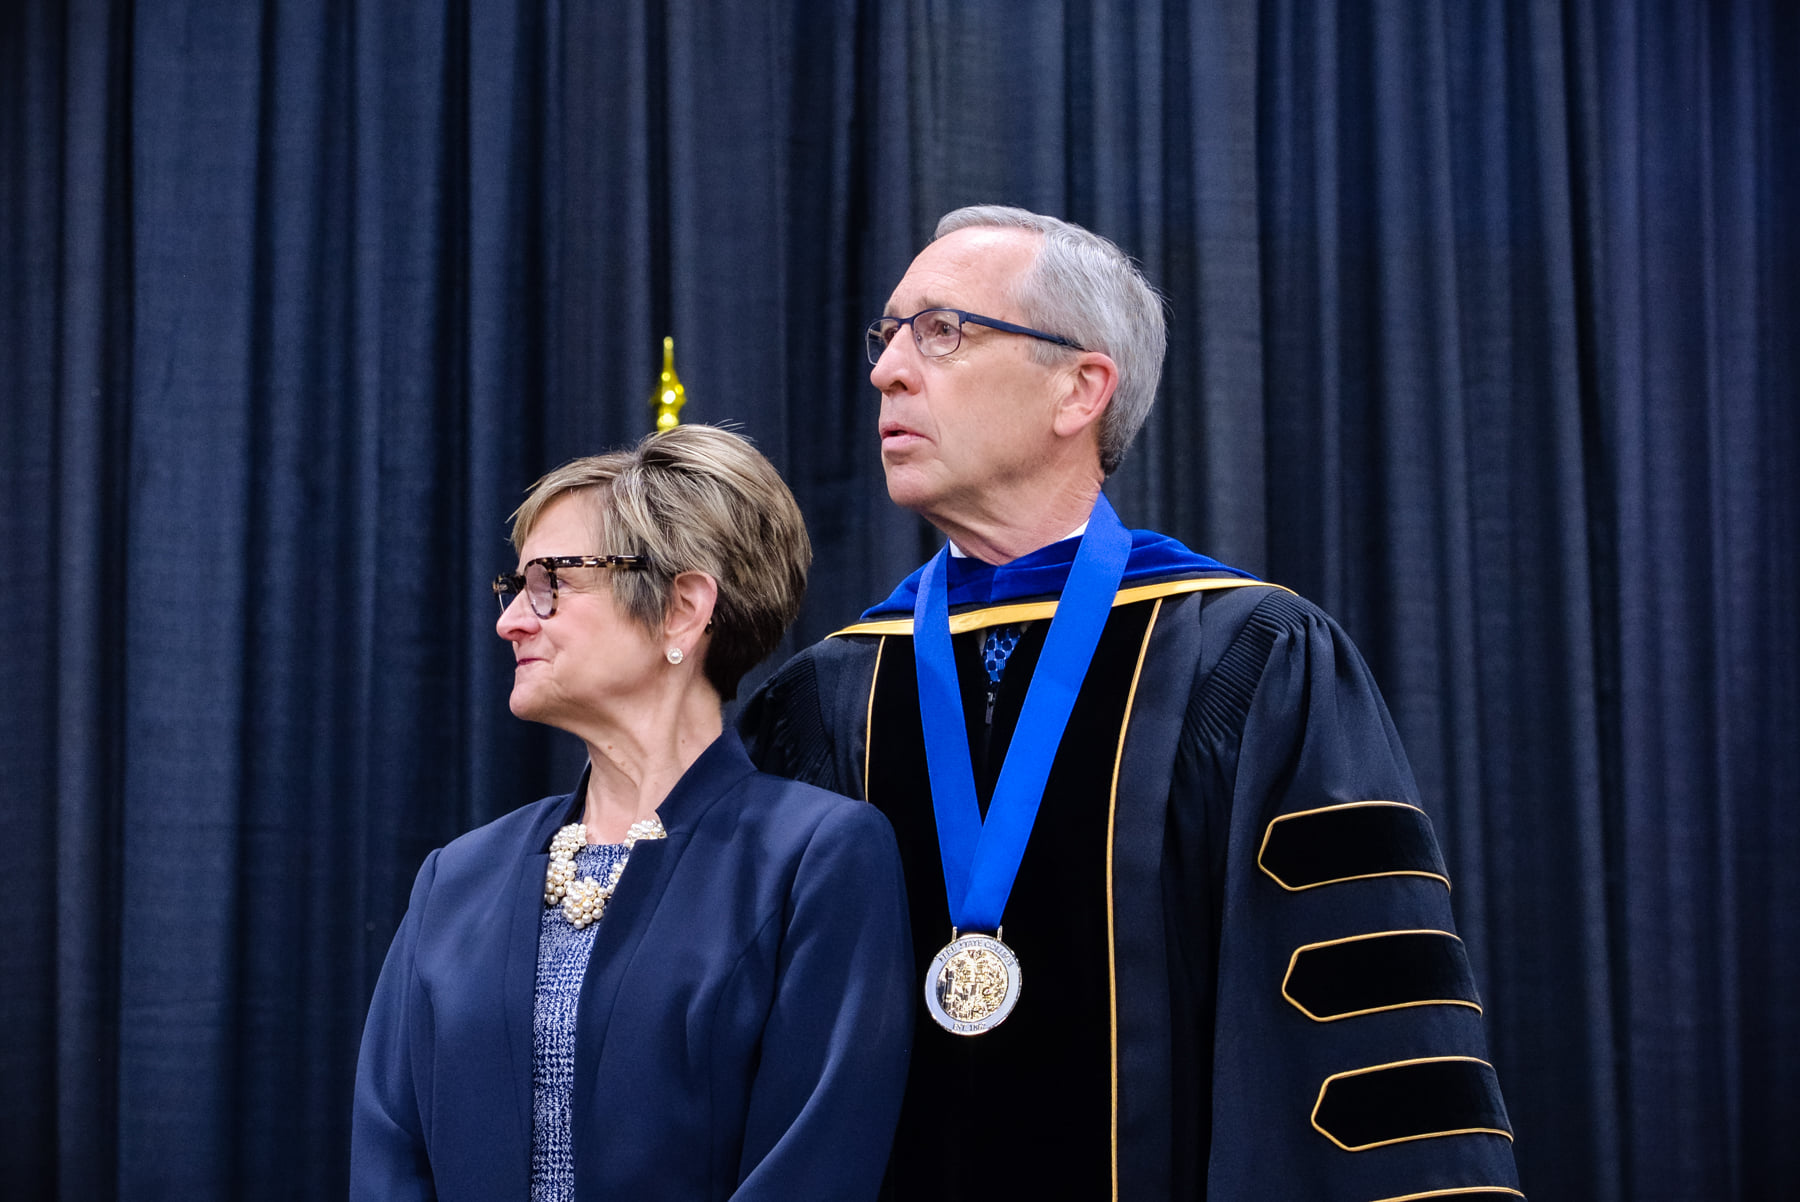 Dan and Elaine Hanson on the stage for commencement.